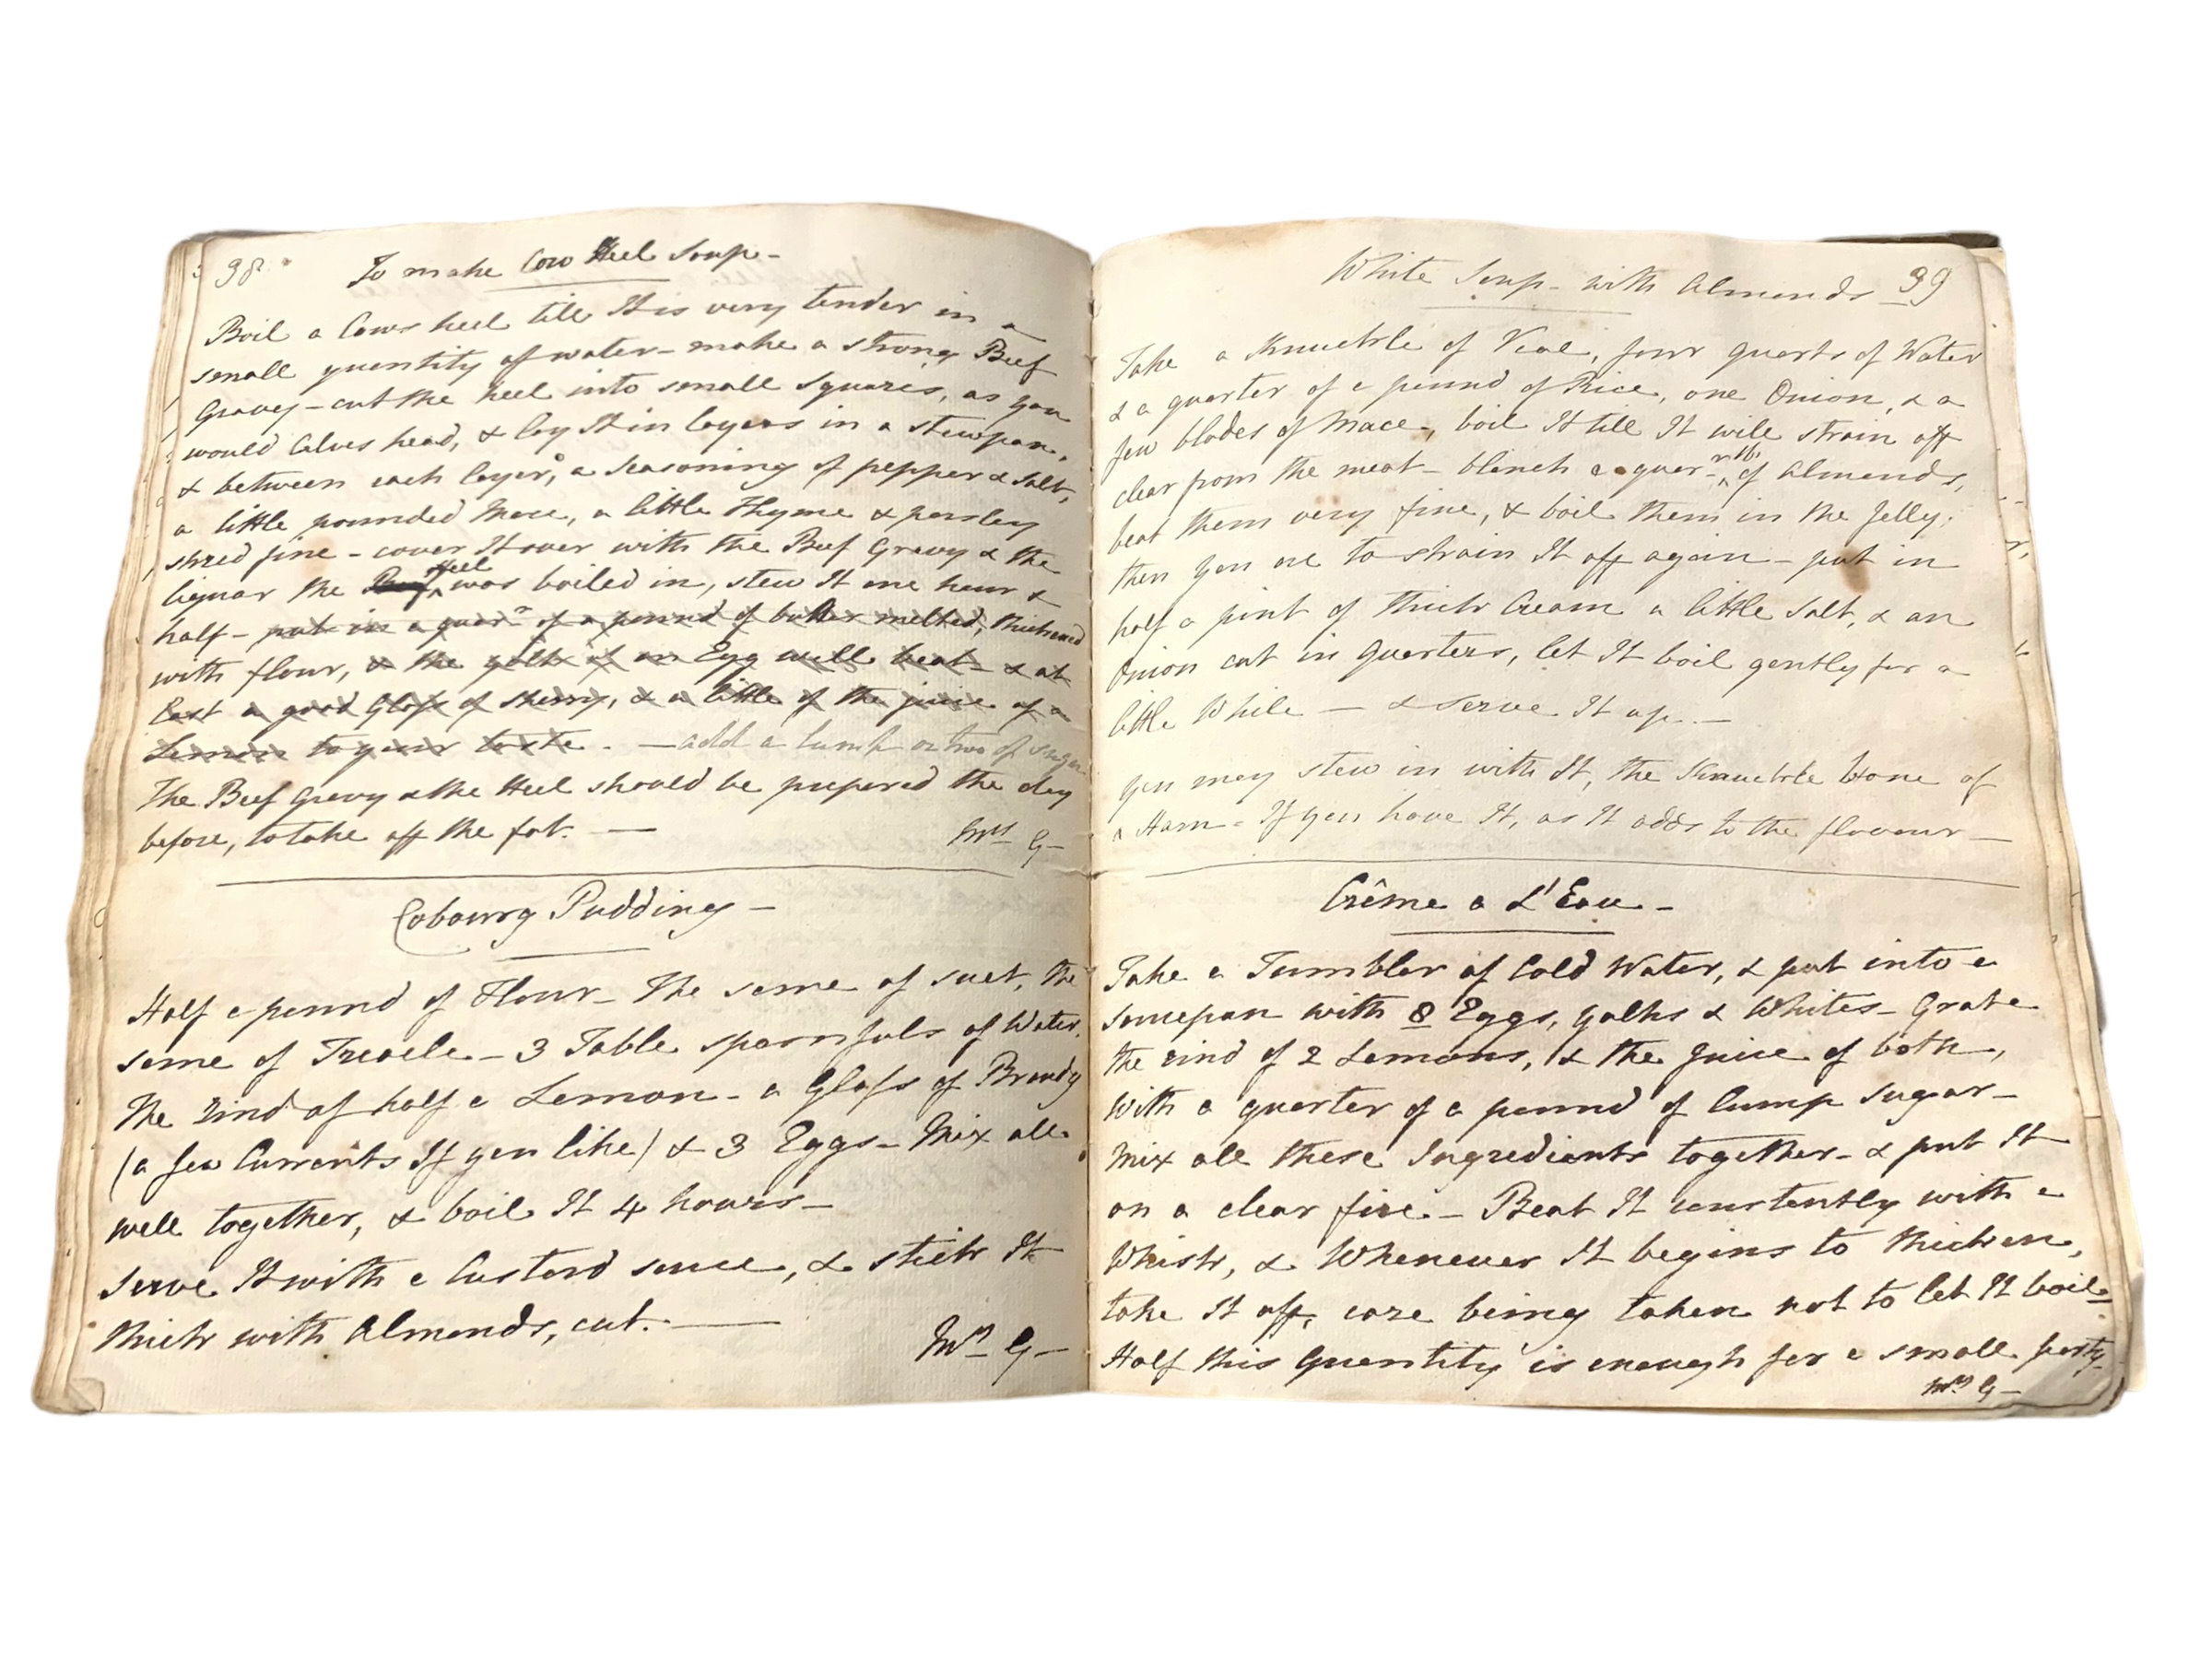 Mss Recipe note book [c. 1850] - Image 2 of 5